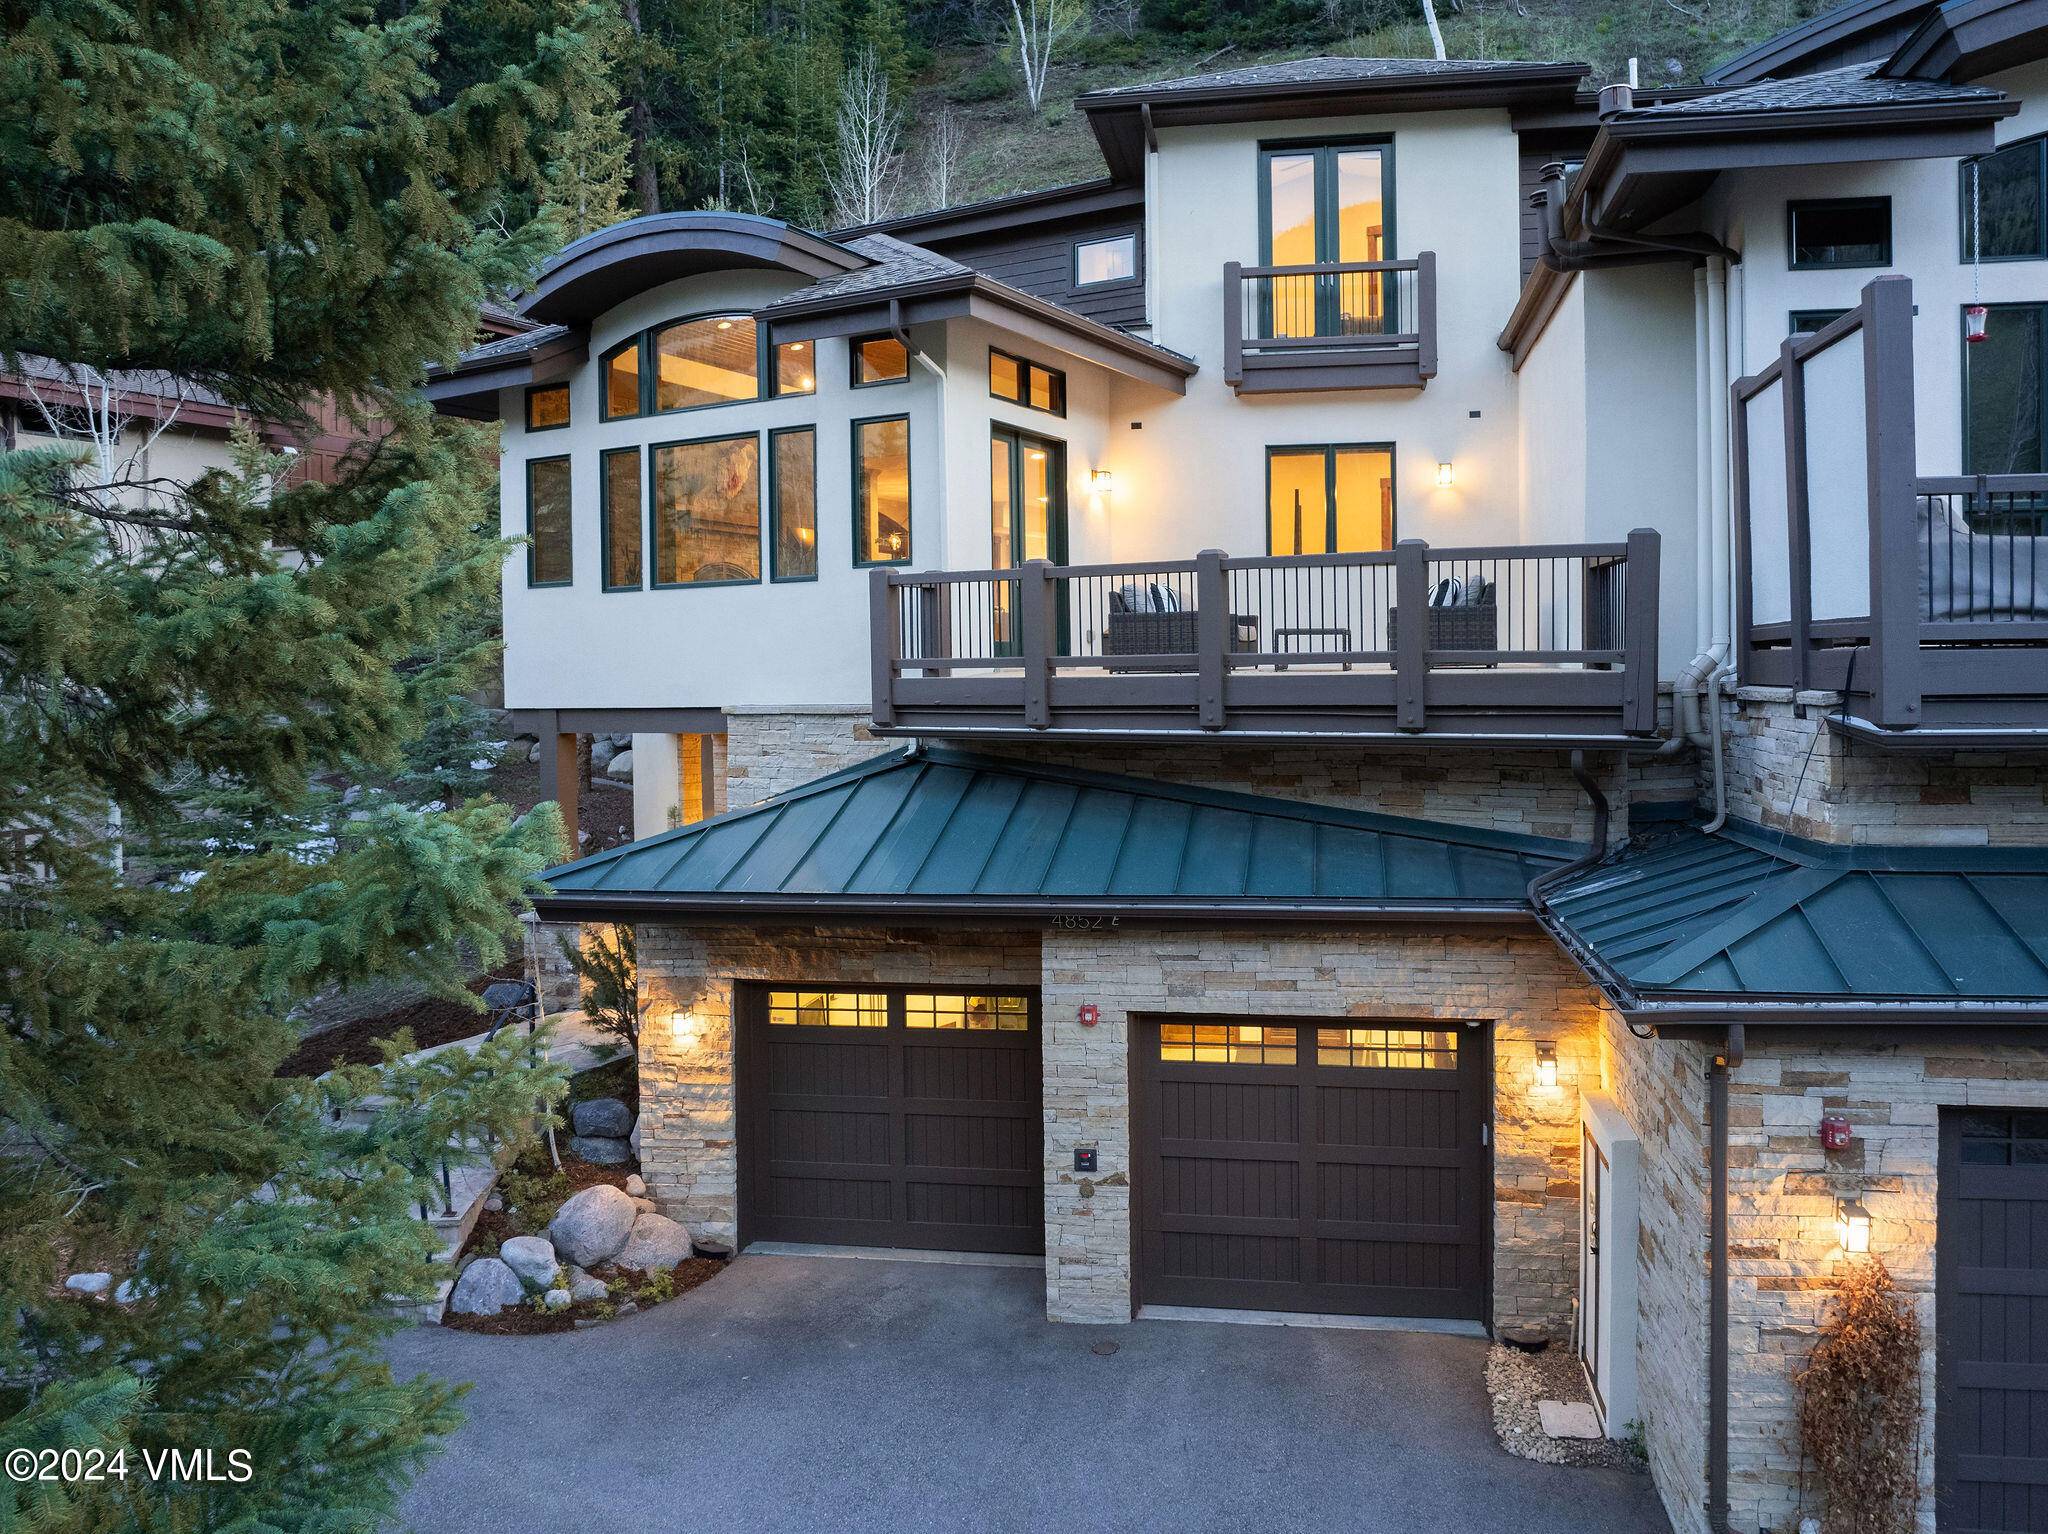 Extensive interior updates transform this unique duplex home into a fresh, bright, sophisticated mountain sanctuary nestled in the charming rustic neighborhood of East Vail.